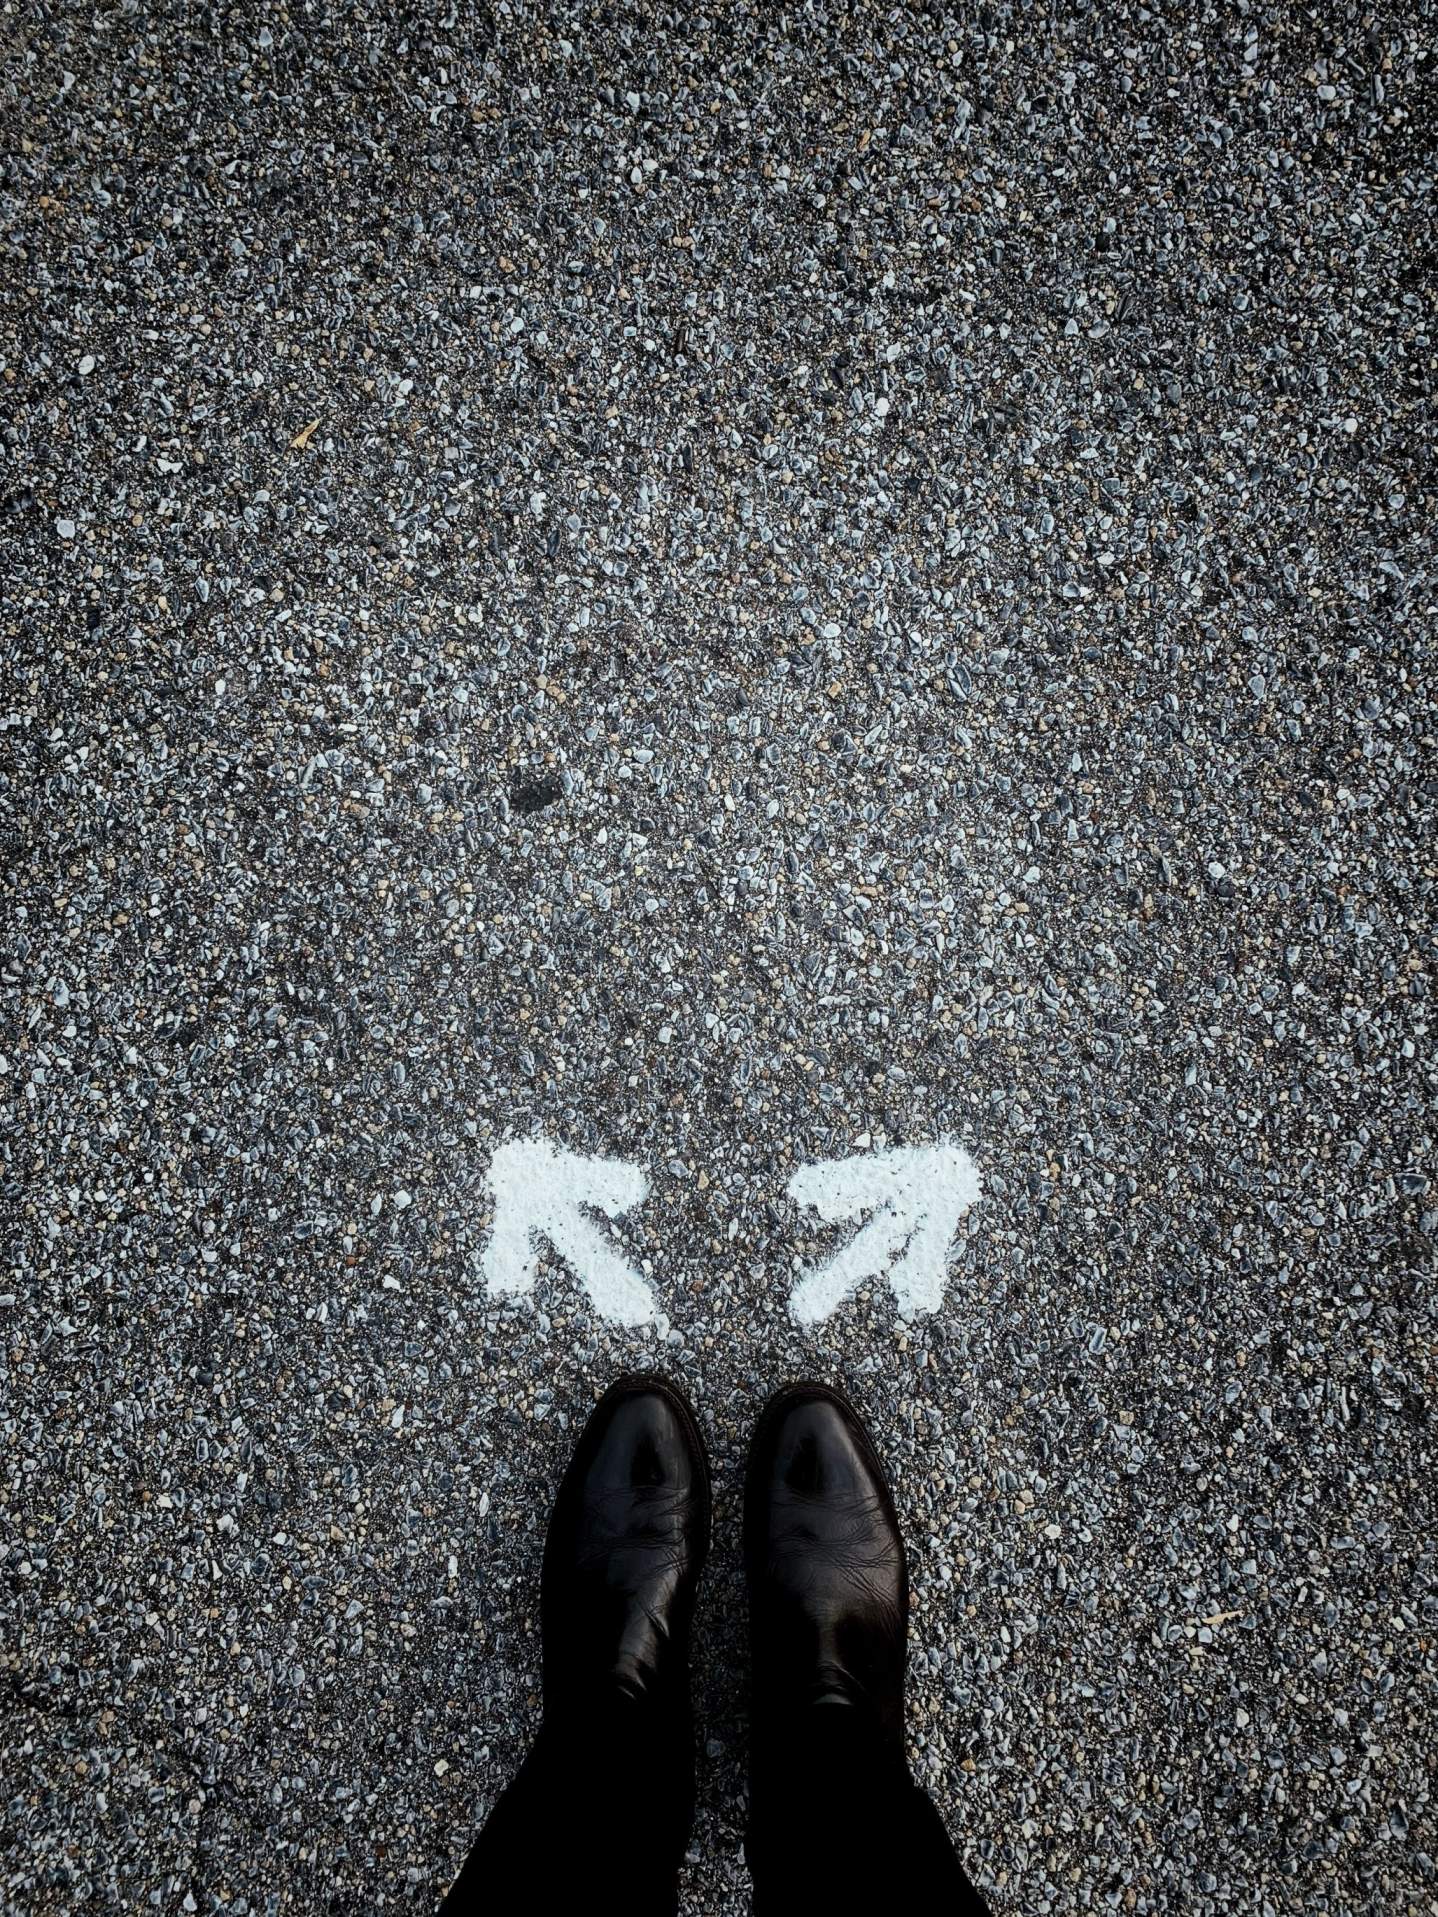 Person deciding whether to go left or right - Should You Shift or Change Your Career?